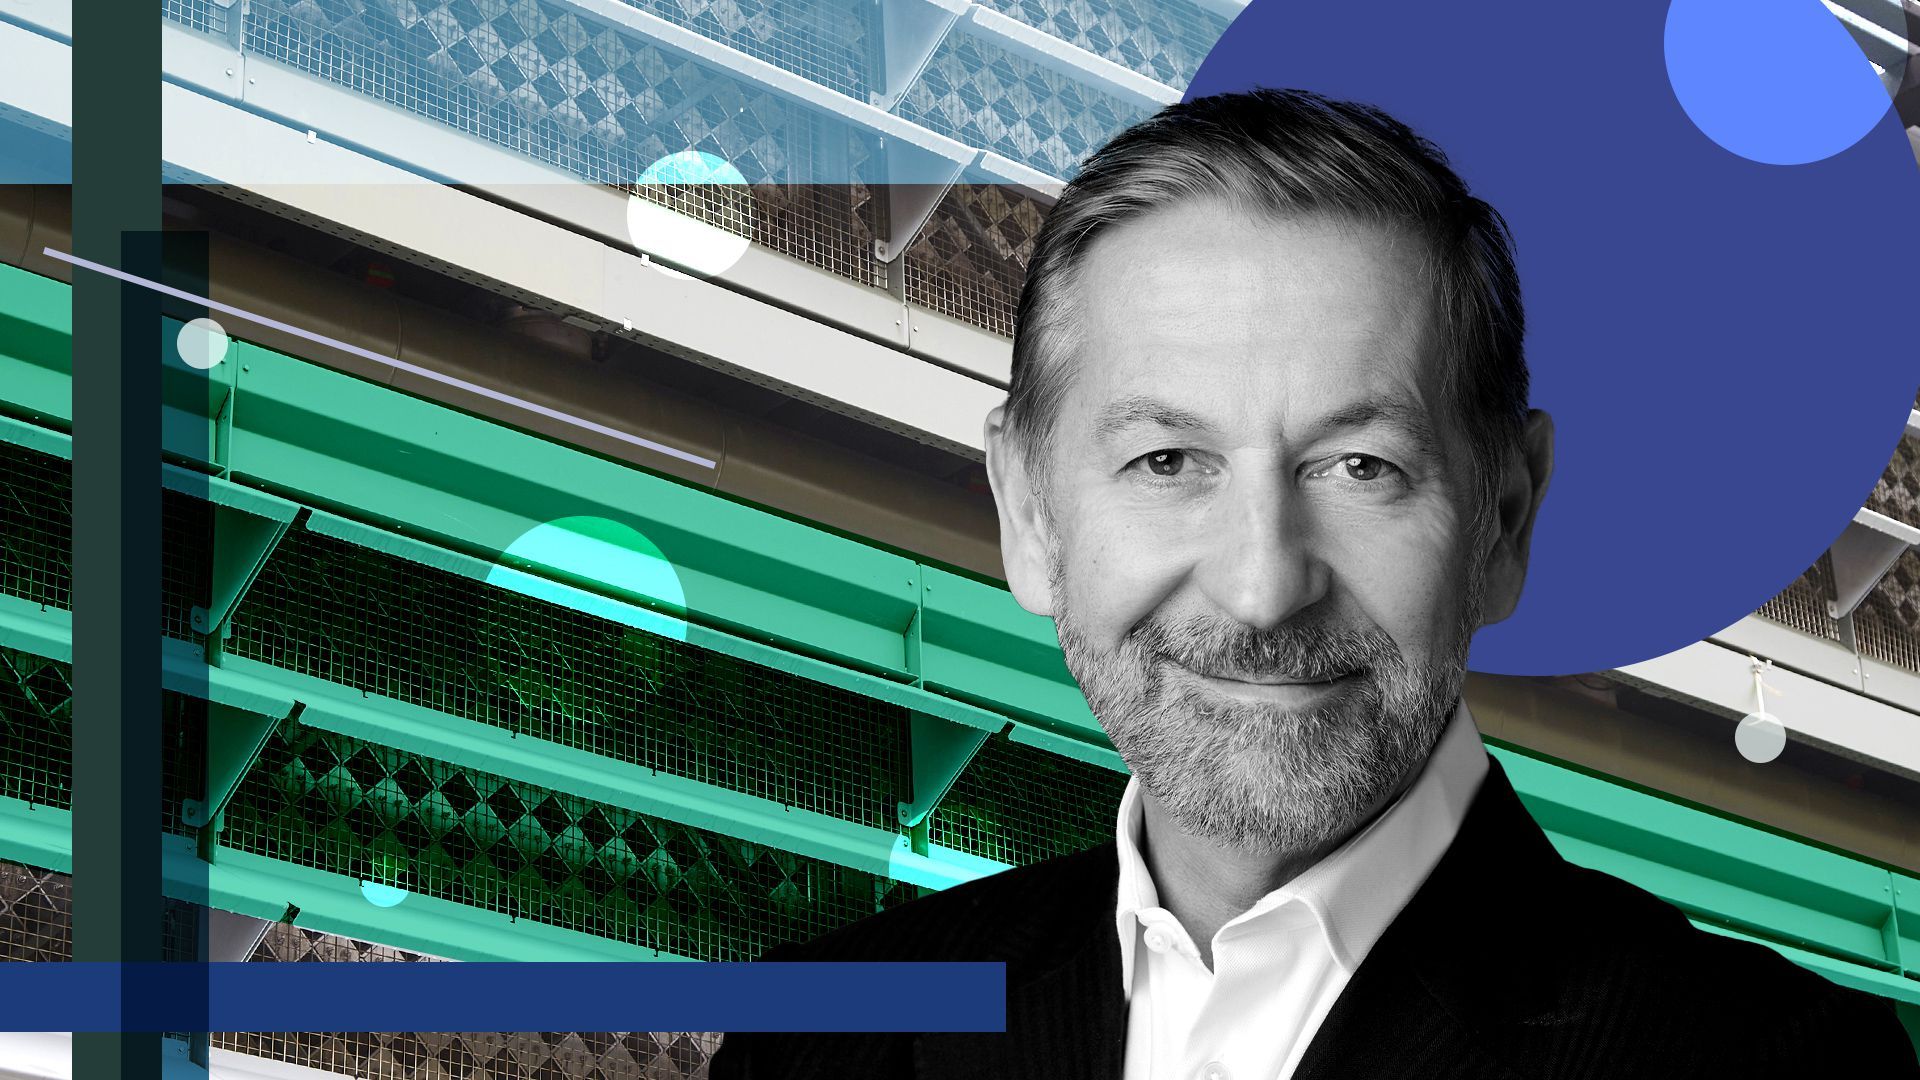 Photo illustration of Hans Kobler, co-founder and managing partner of Energy Impact Partners, with direct air capture filters and abstract shapes.